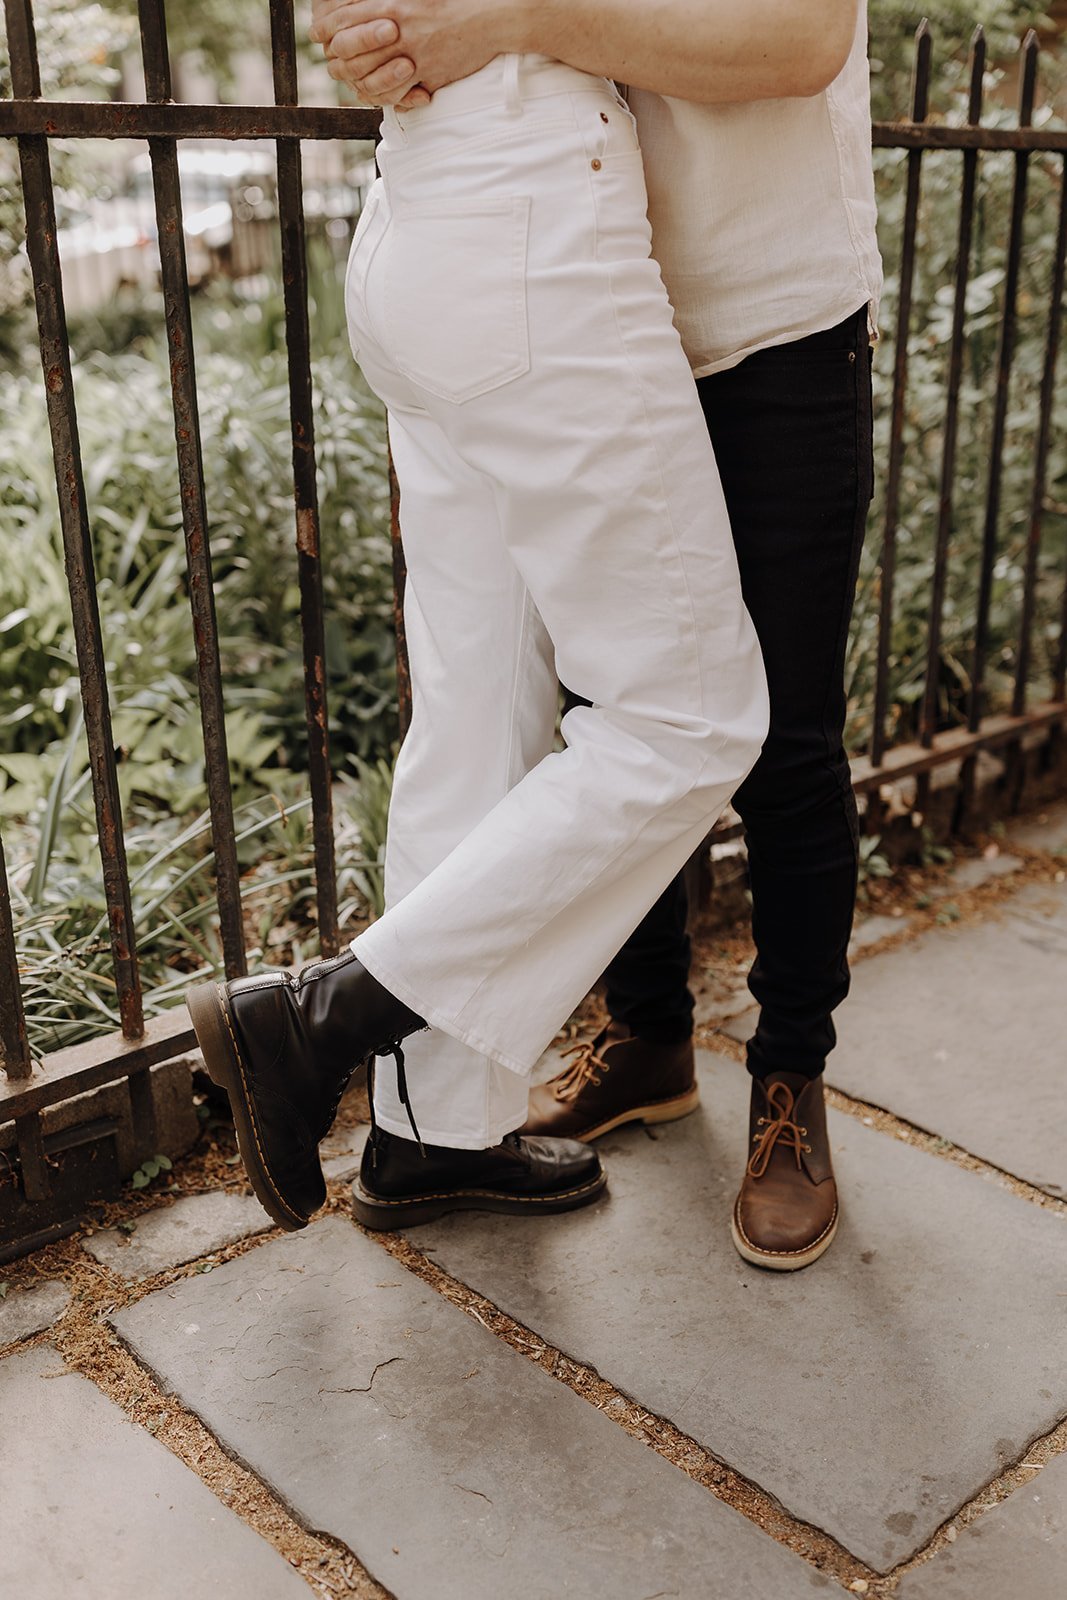 Couple hugging on the sidewalk during New York engagement photos